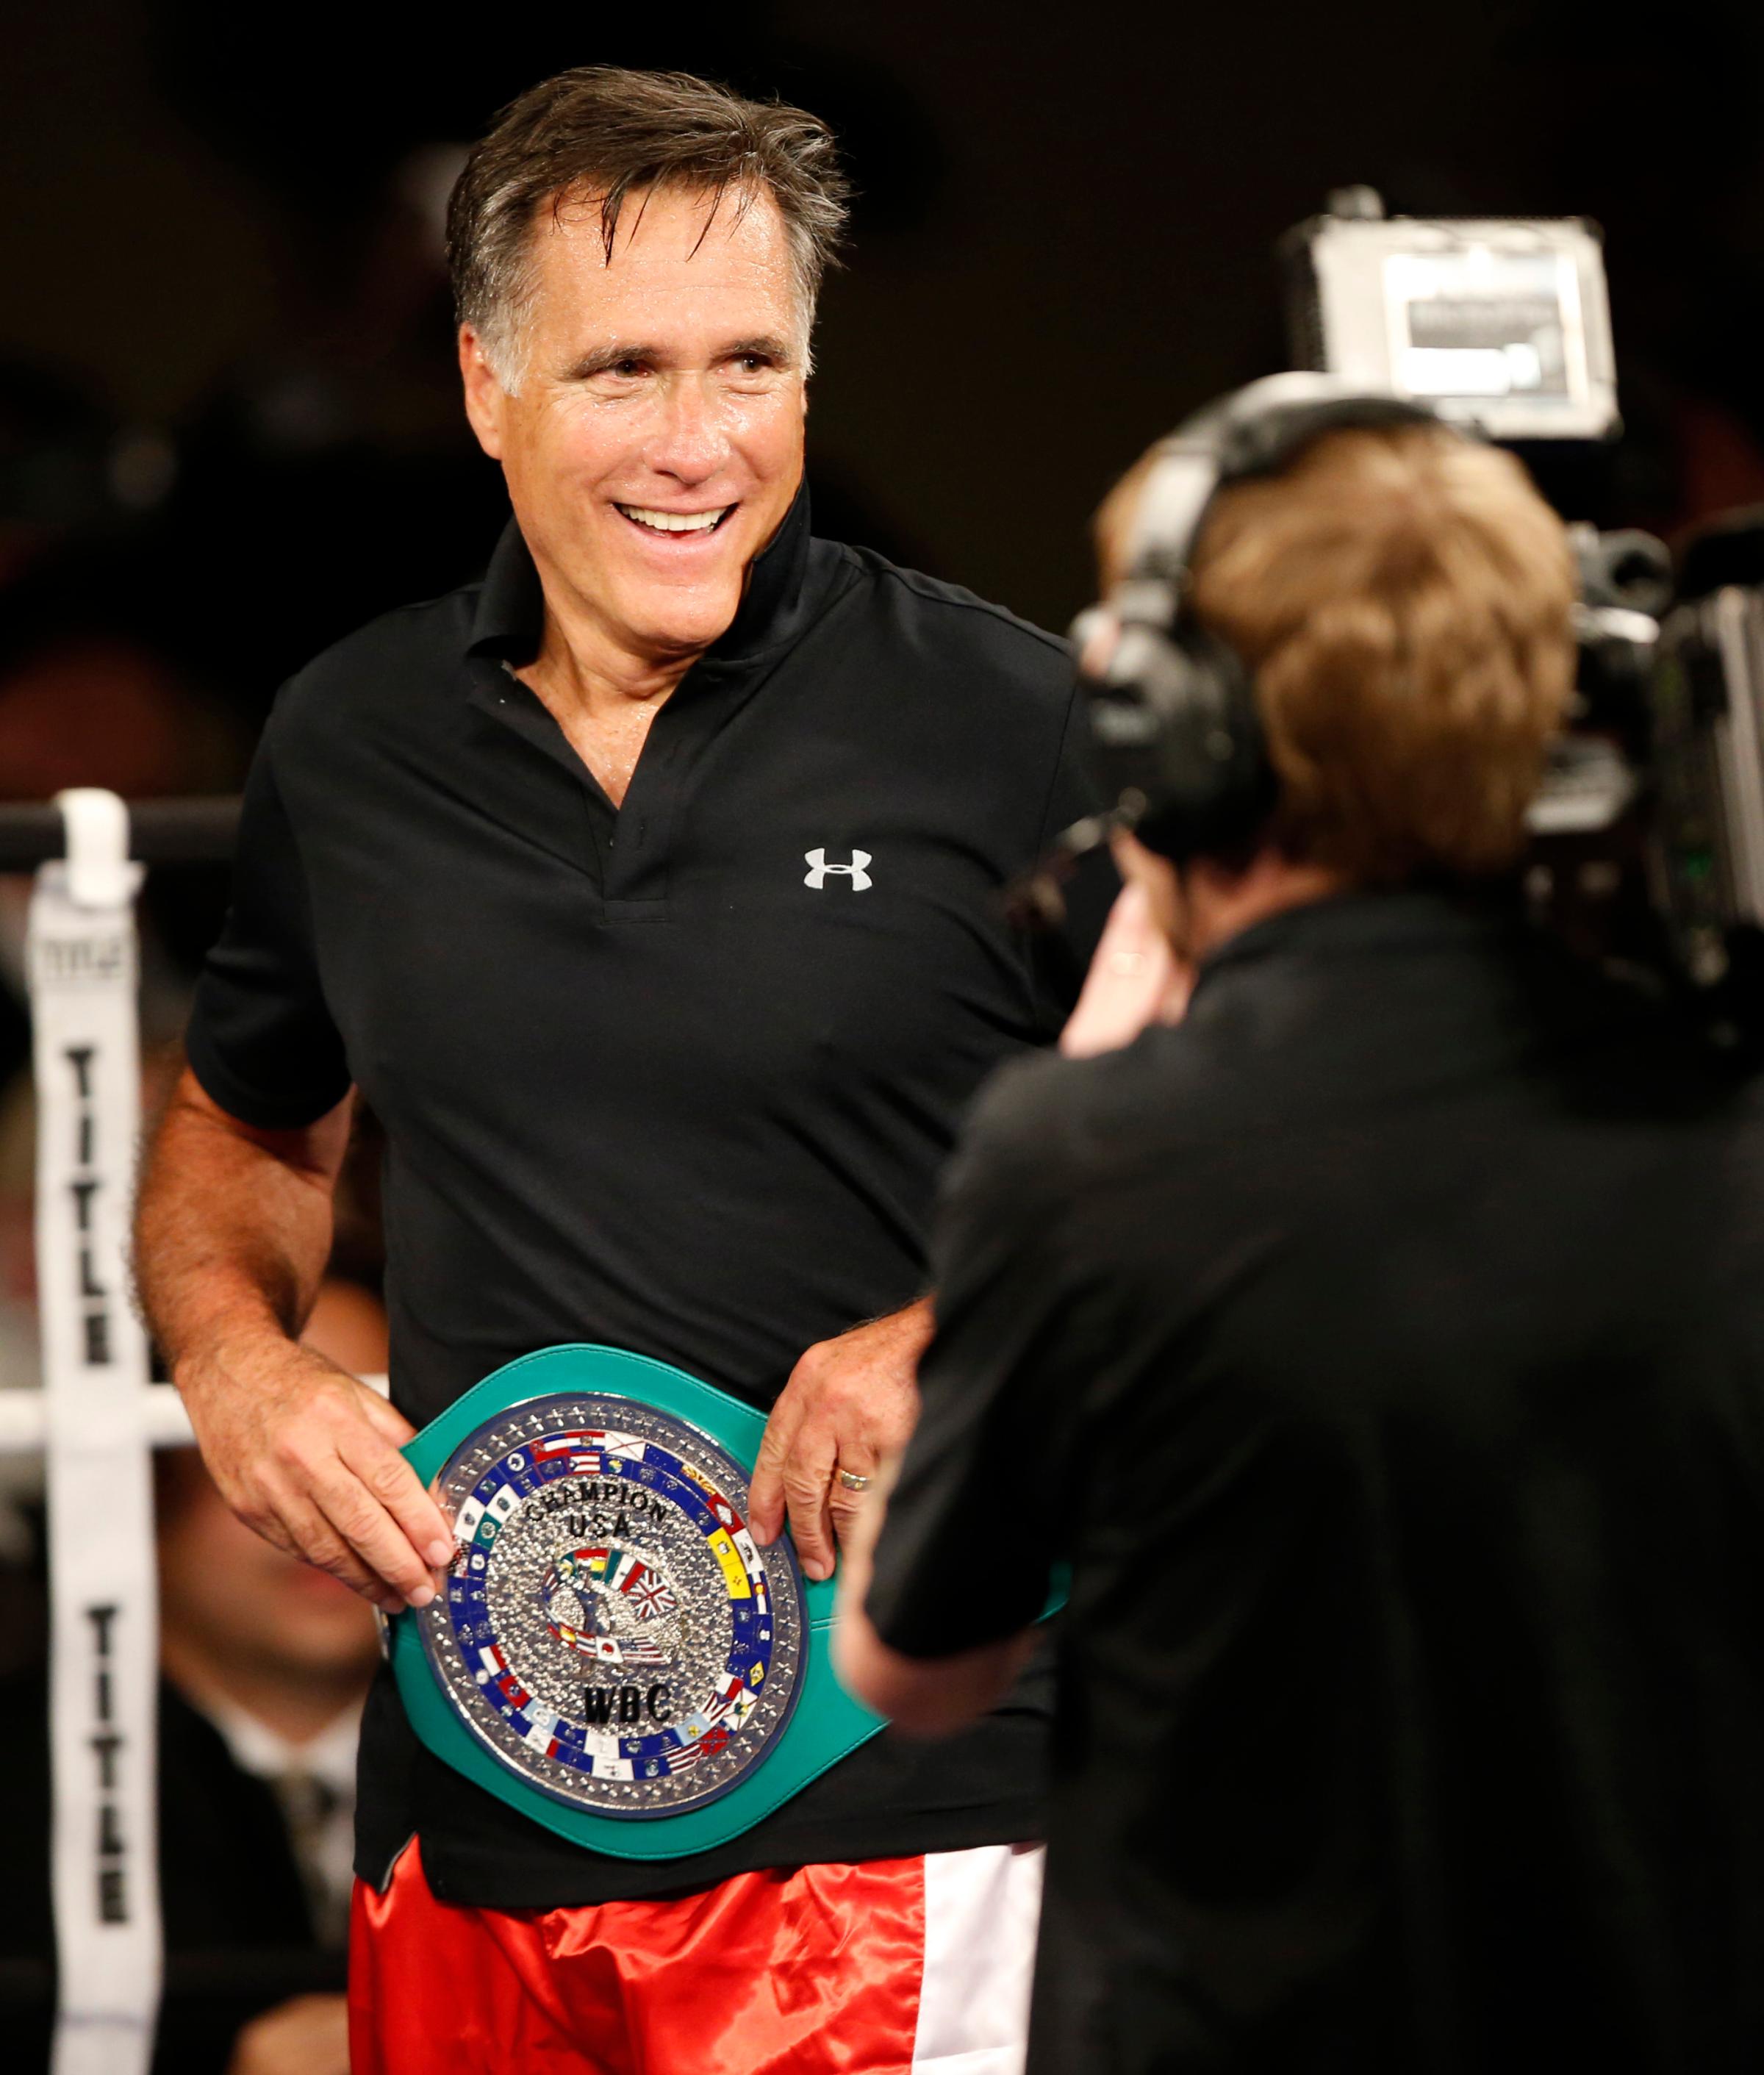 Mitt Romney shows off his boxing belt after a fight with Evander Holyfield during a charity boxing event on May 15, 2015 in Salt Lake City.